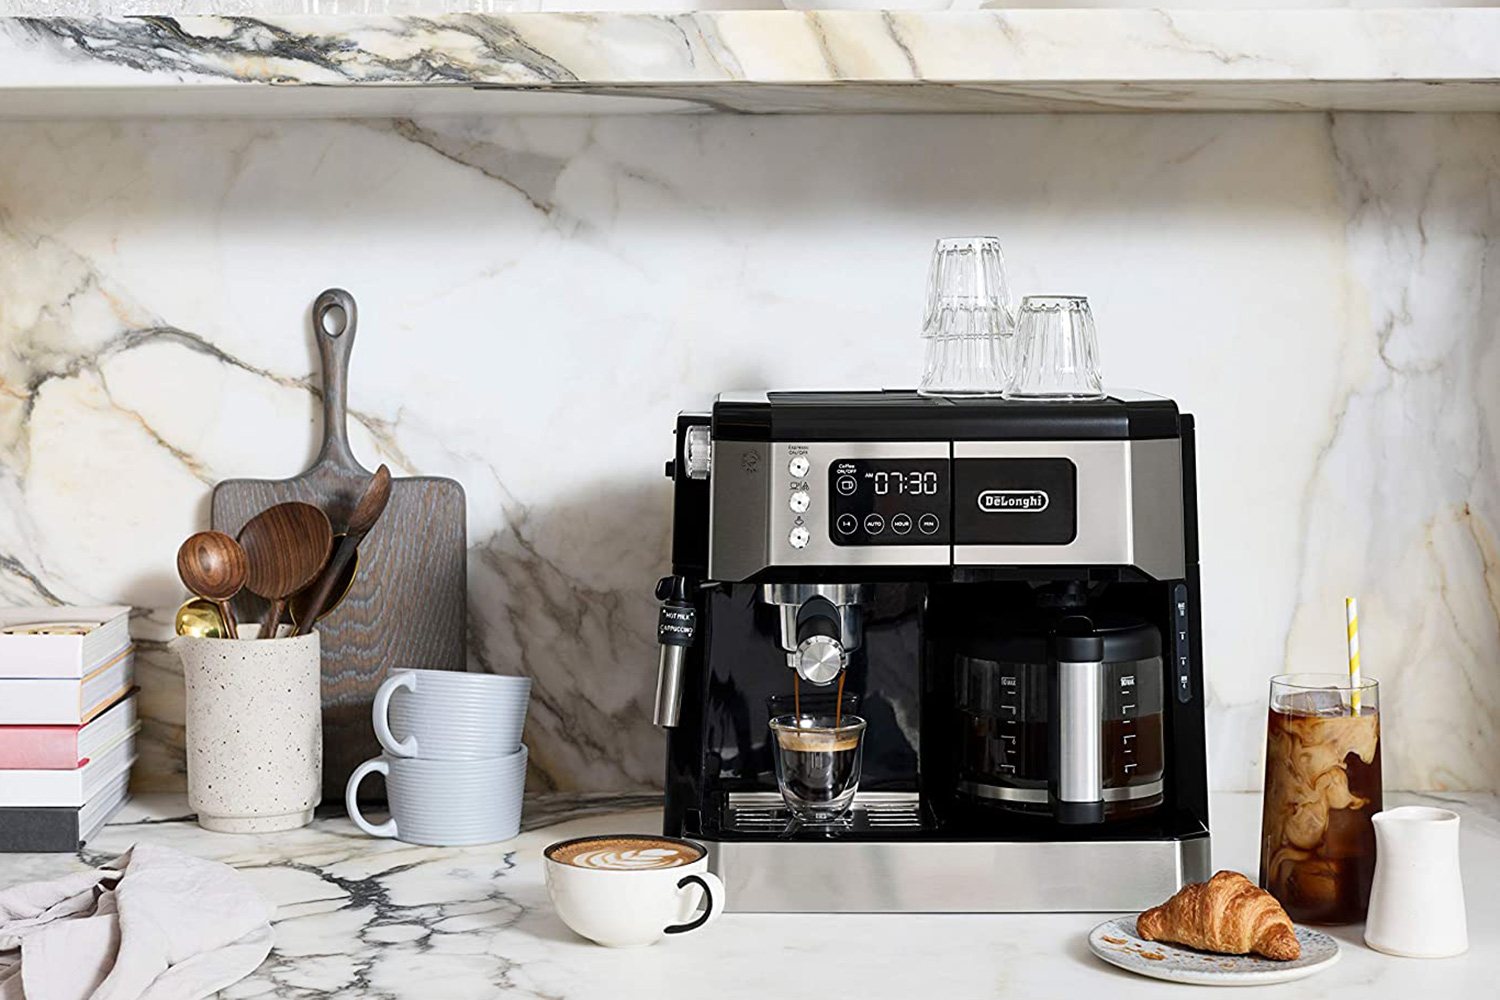 https://www.themanual.com/wp-content/uploads/sites/9/2021/10/best-combination-coffee-makers.jpg?p=1